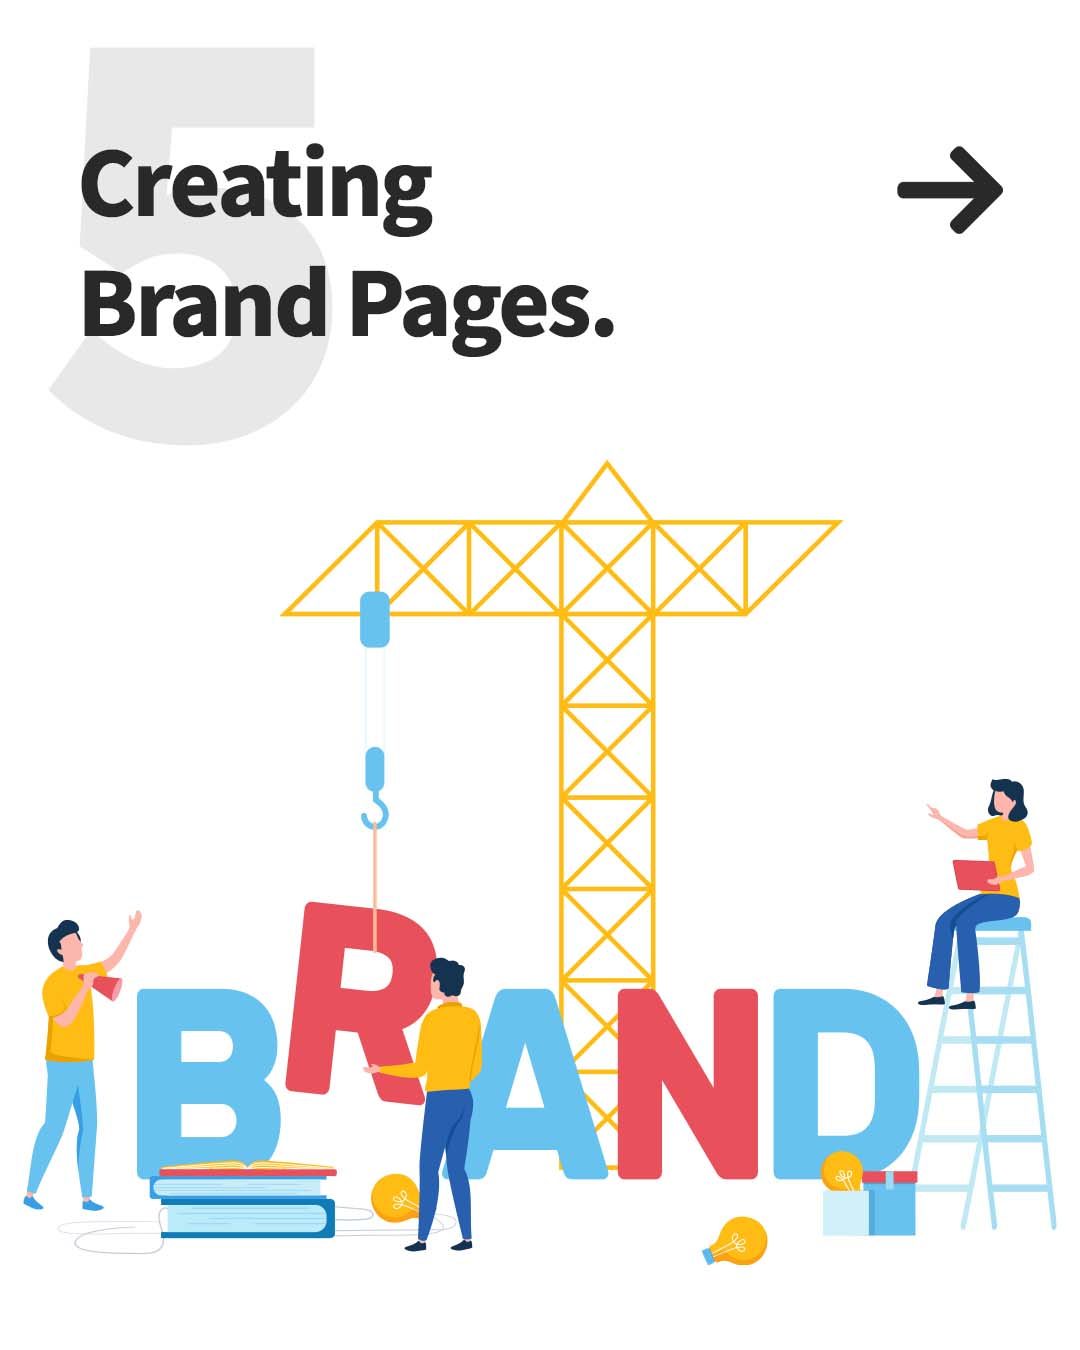 Creating Brand Pages